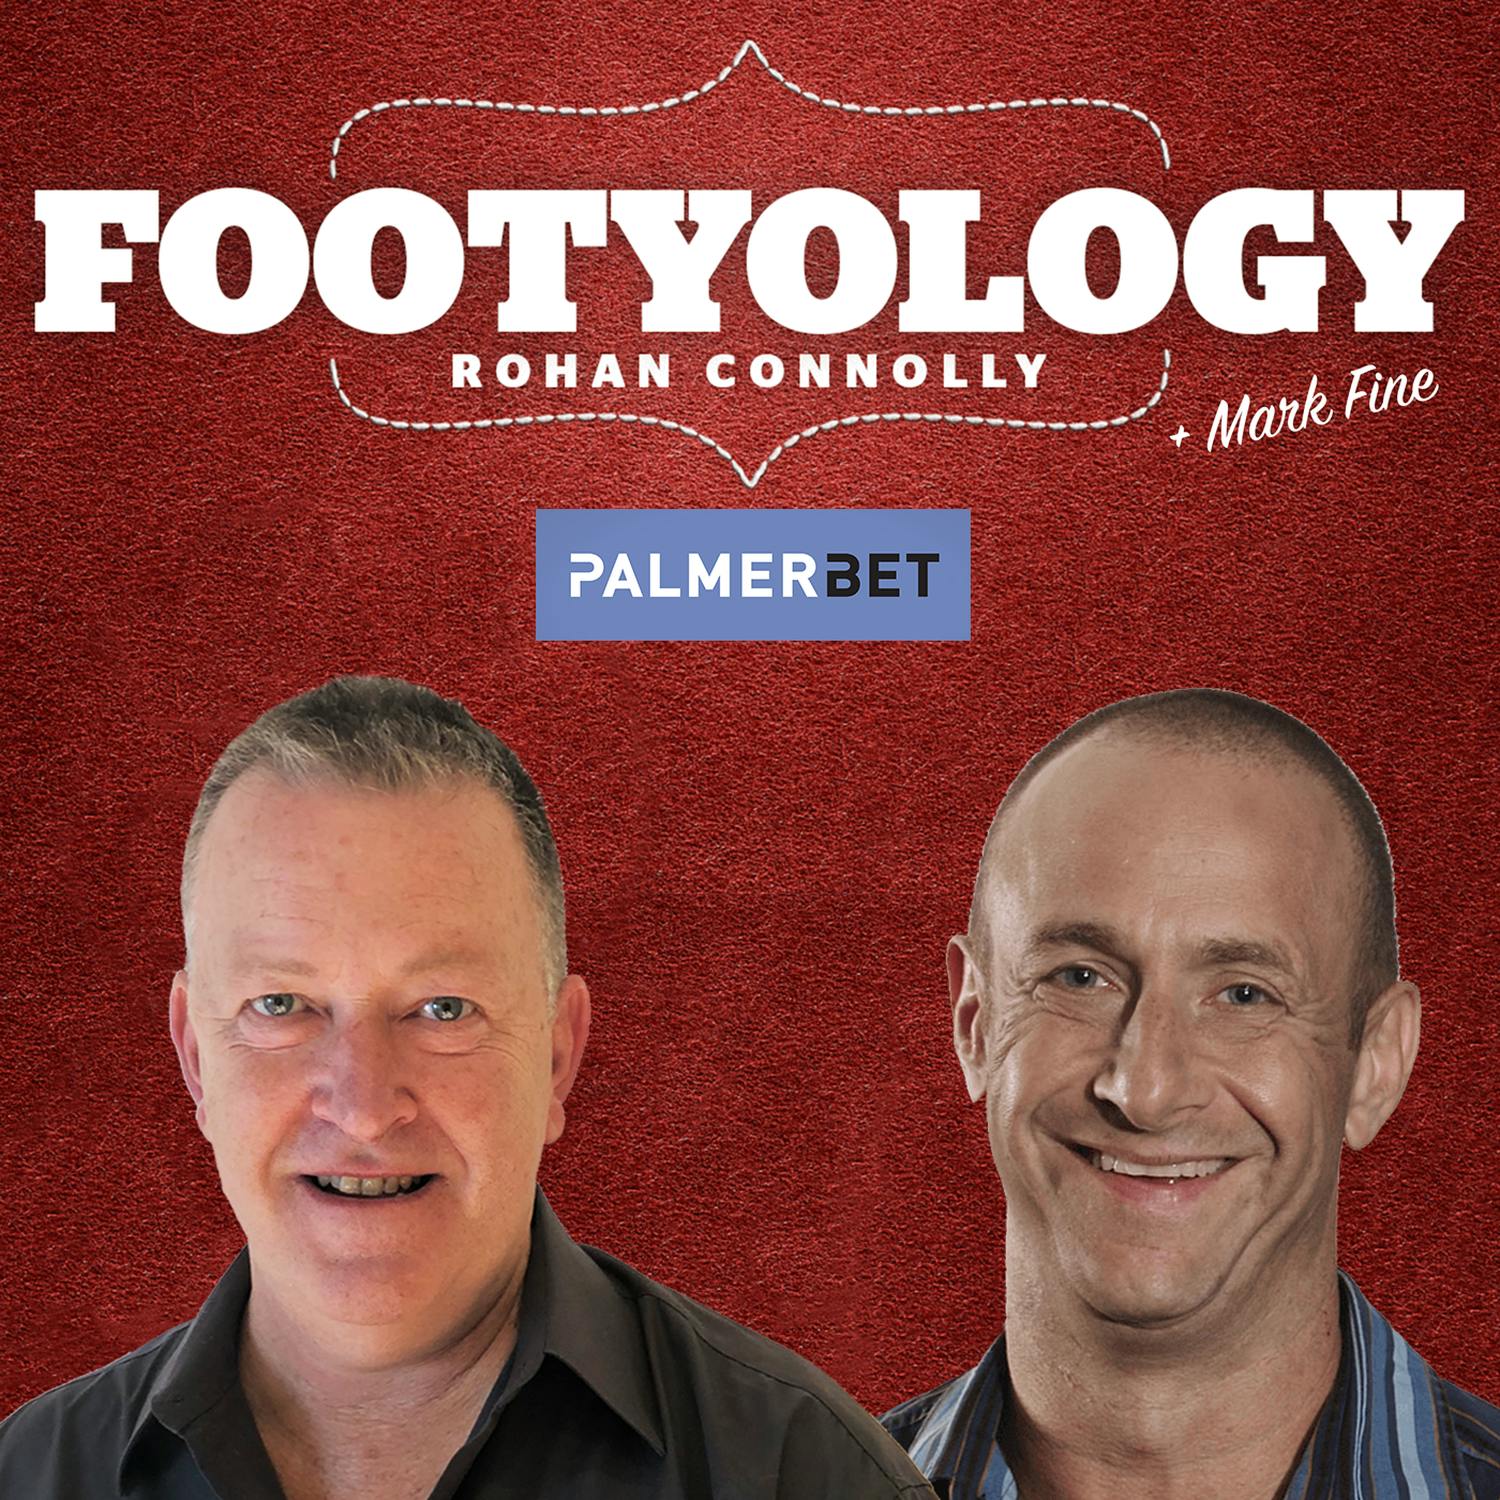 Footyology Podcast - January 11th 2022